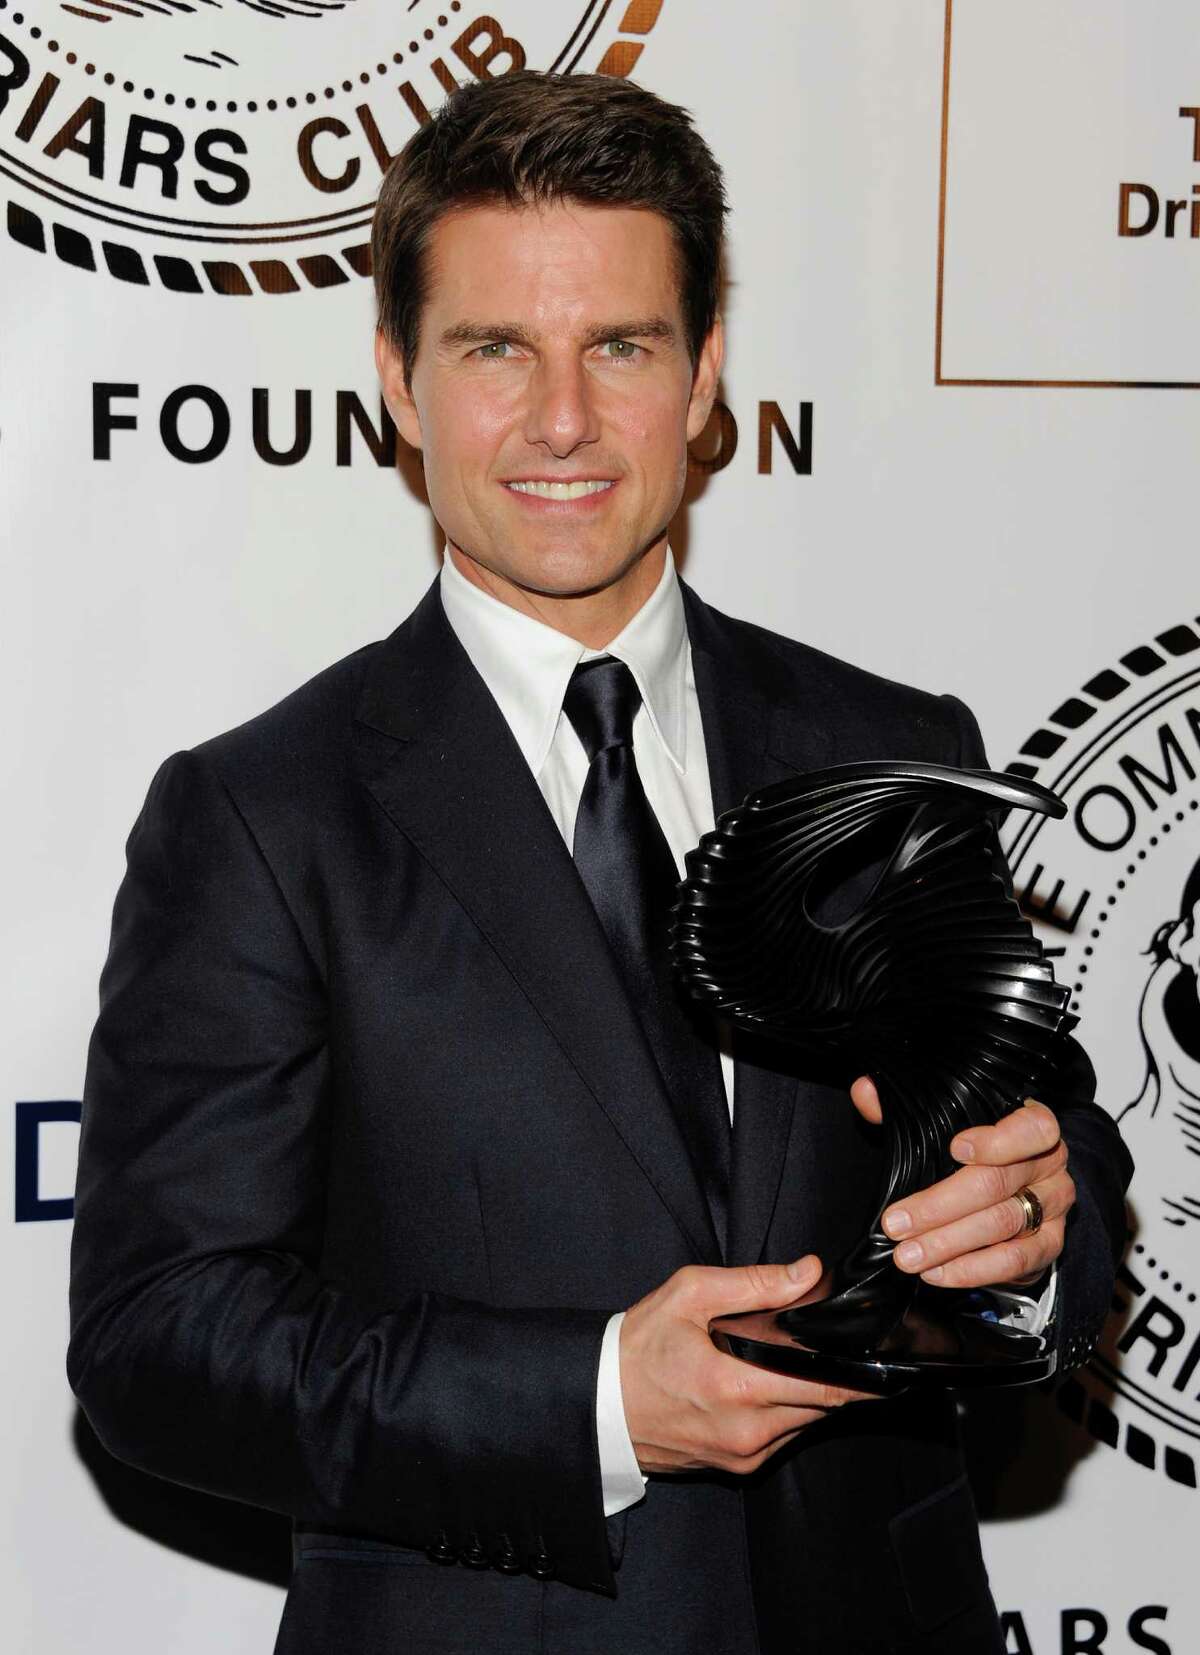 Actor Tom Cruise poses after being honored by The Friars Club and Friars Foundation at The Waldorf-Astoria on Tuesday June 12, 2012, in New York. (Photo by Evan Agostini/Invision/AP)